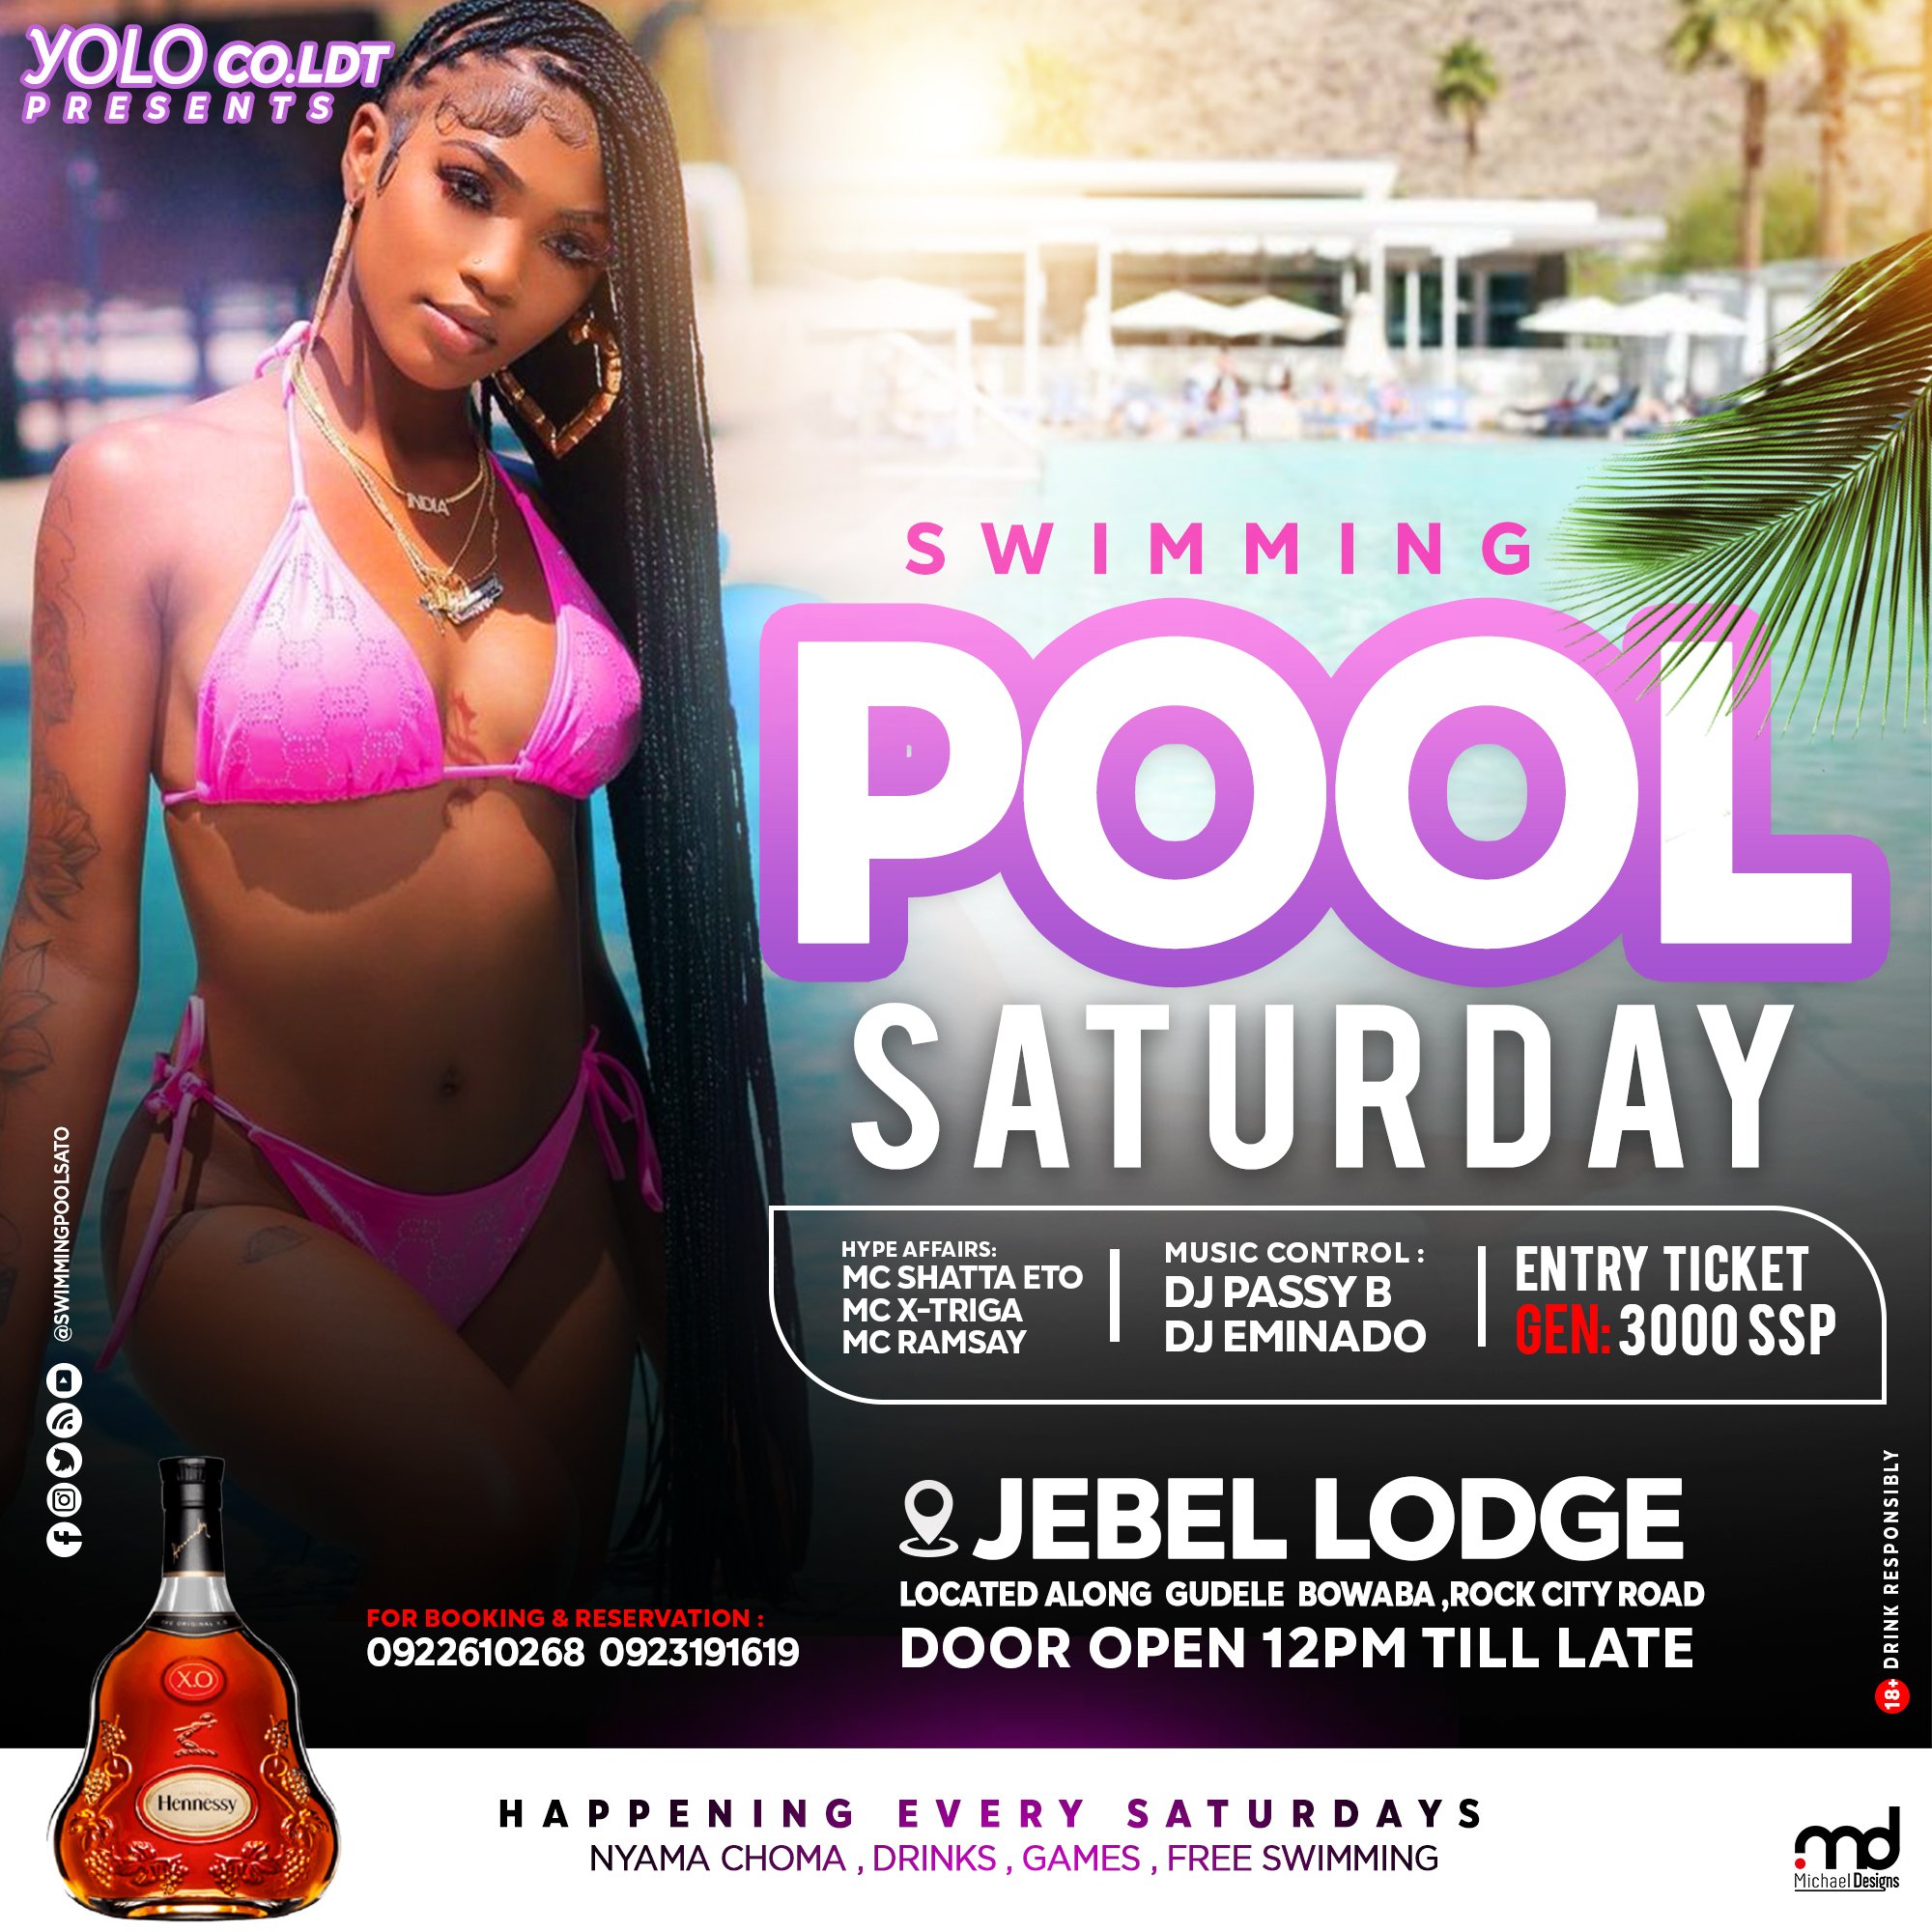 THIS SATURDAY - FIRST EVER POOL PARTY IN JUBA - JEBEL LODGE